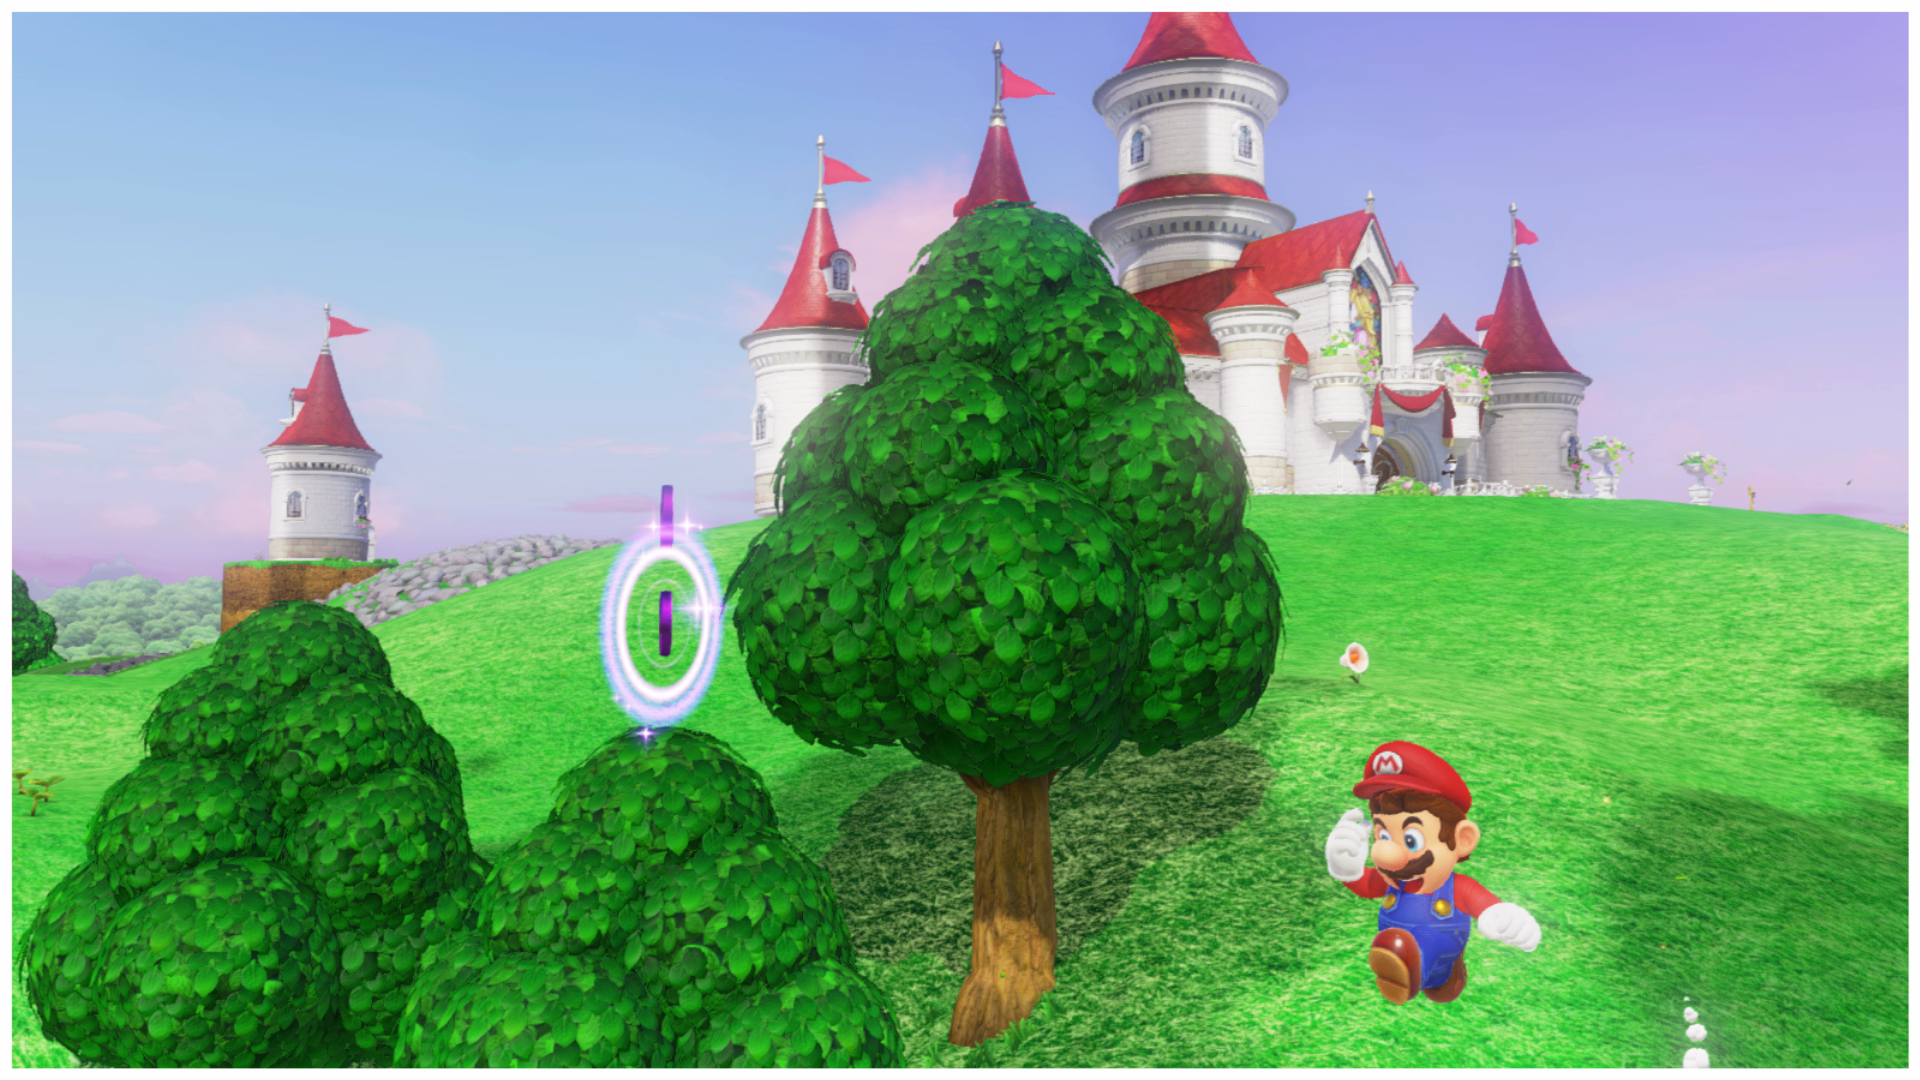 Here's how to find all the purple coins in the Mushroom Kingdom | The OP